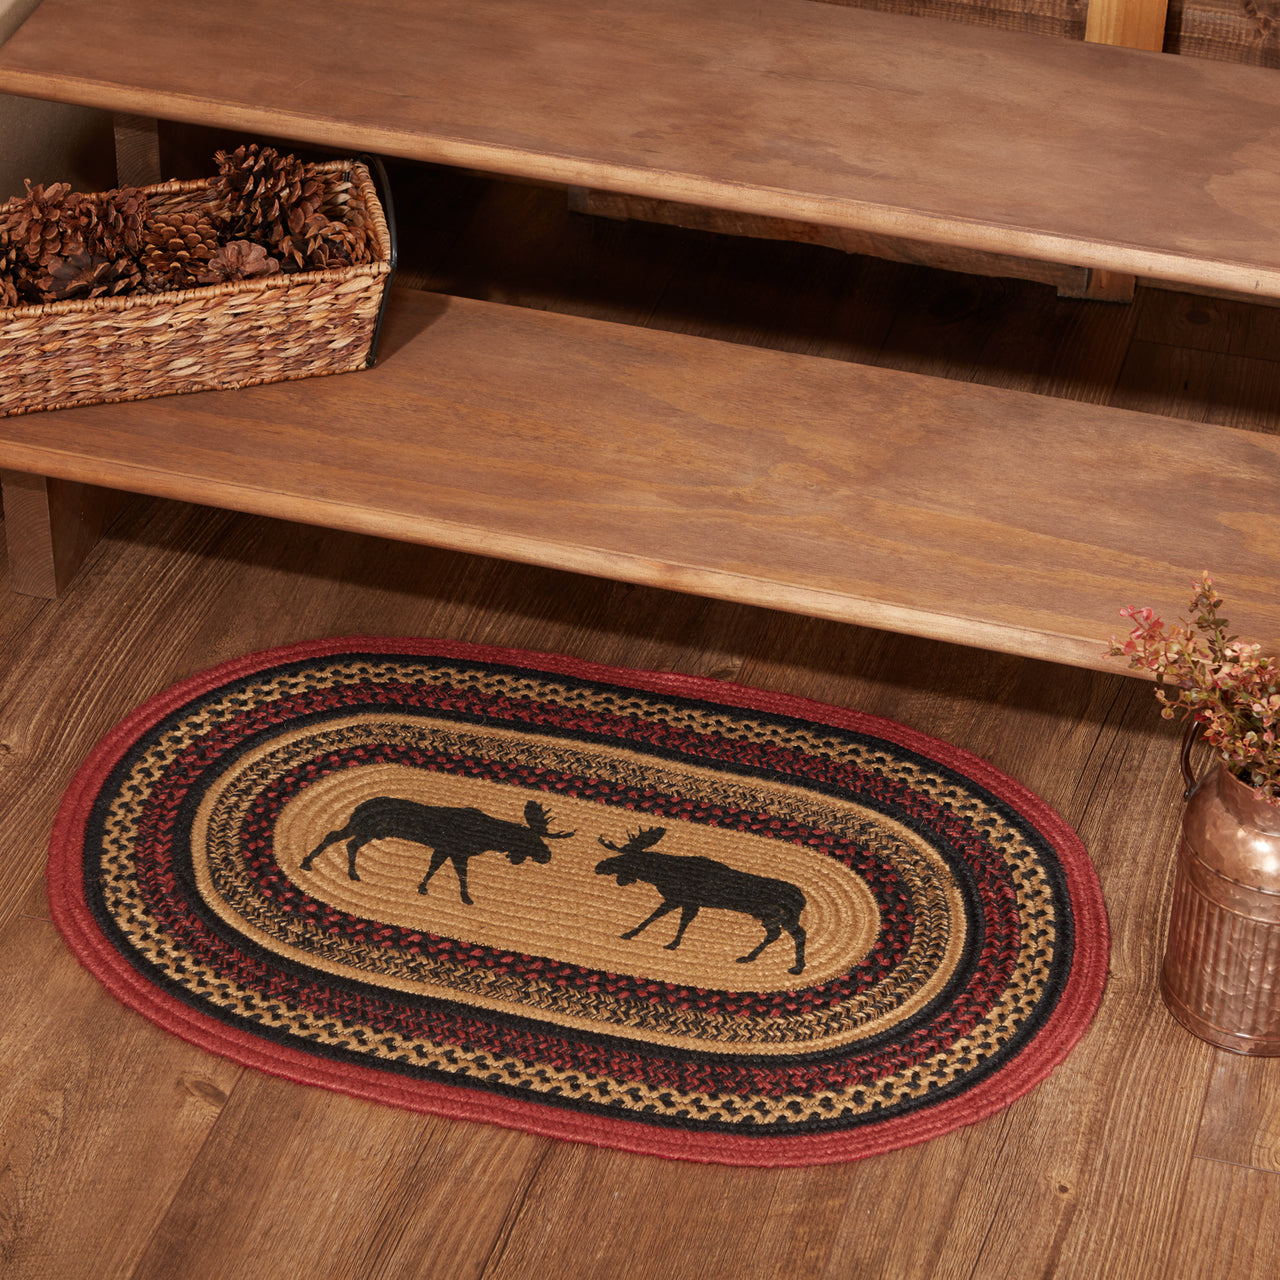 Cumberland Stenciled Moose Jute Braided Rug Oval 20"x30" with Rug Pad VHC Brands